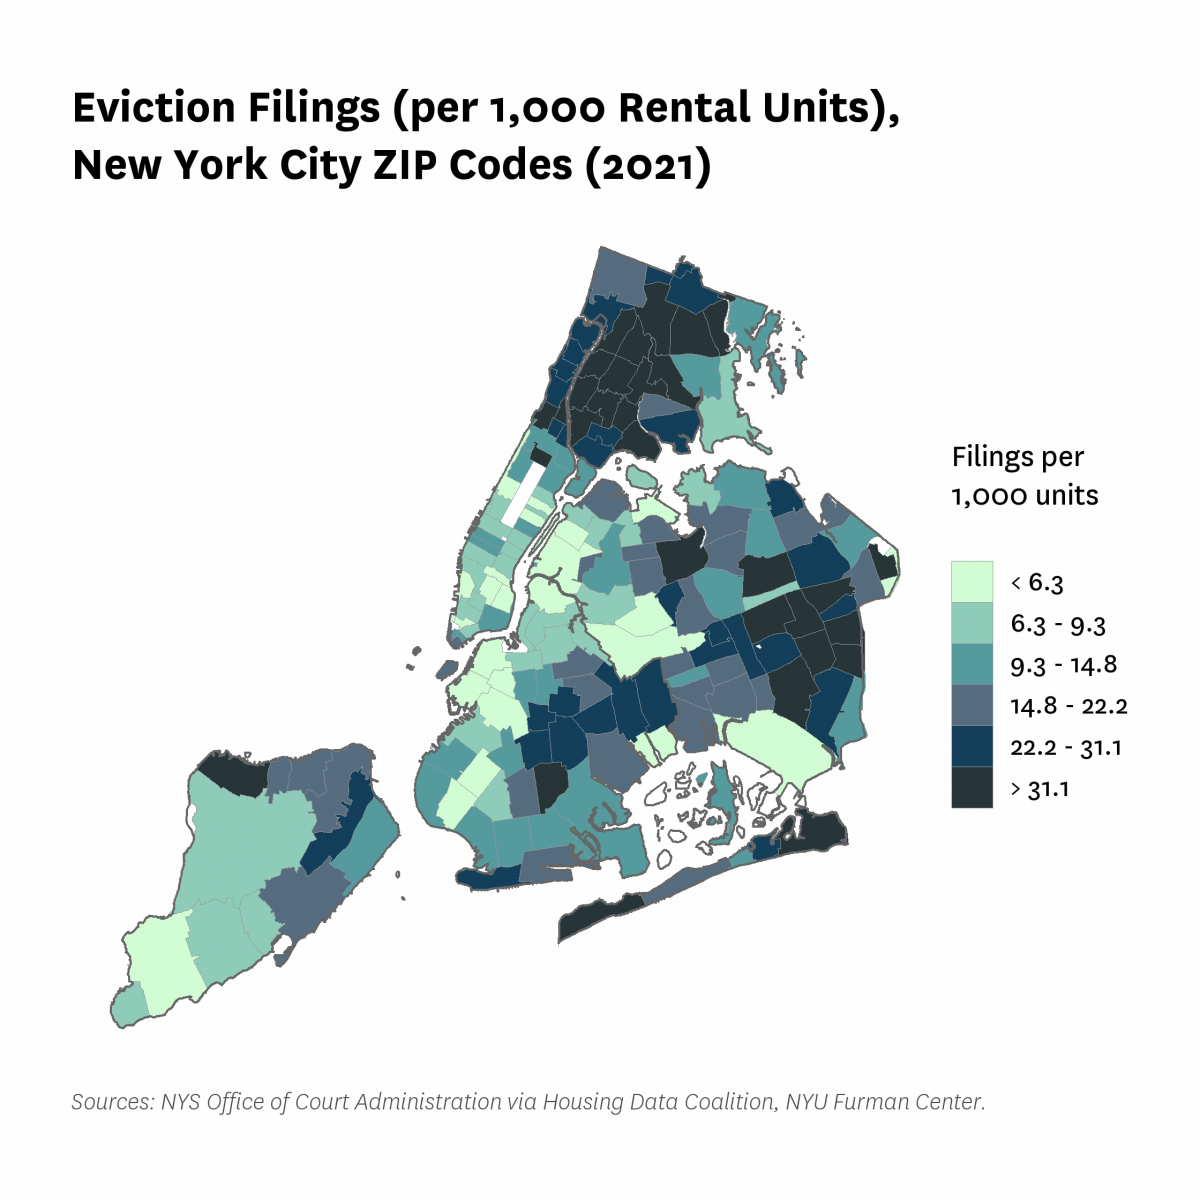 Map showing the 2021 eviction filing rates by zip code in New York City.